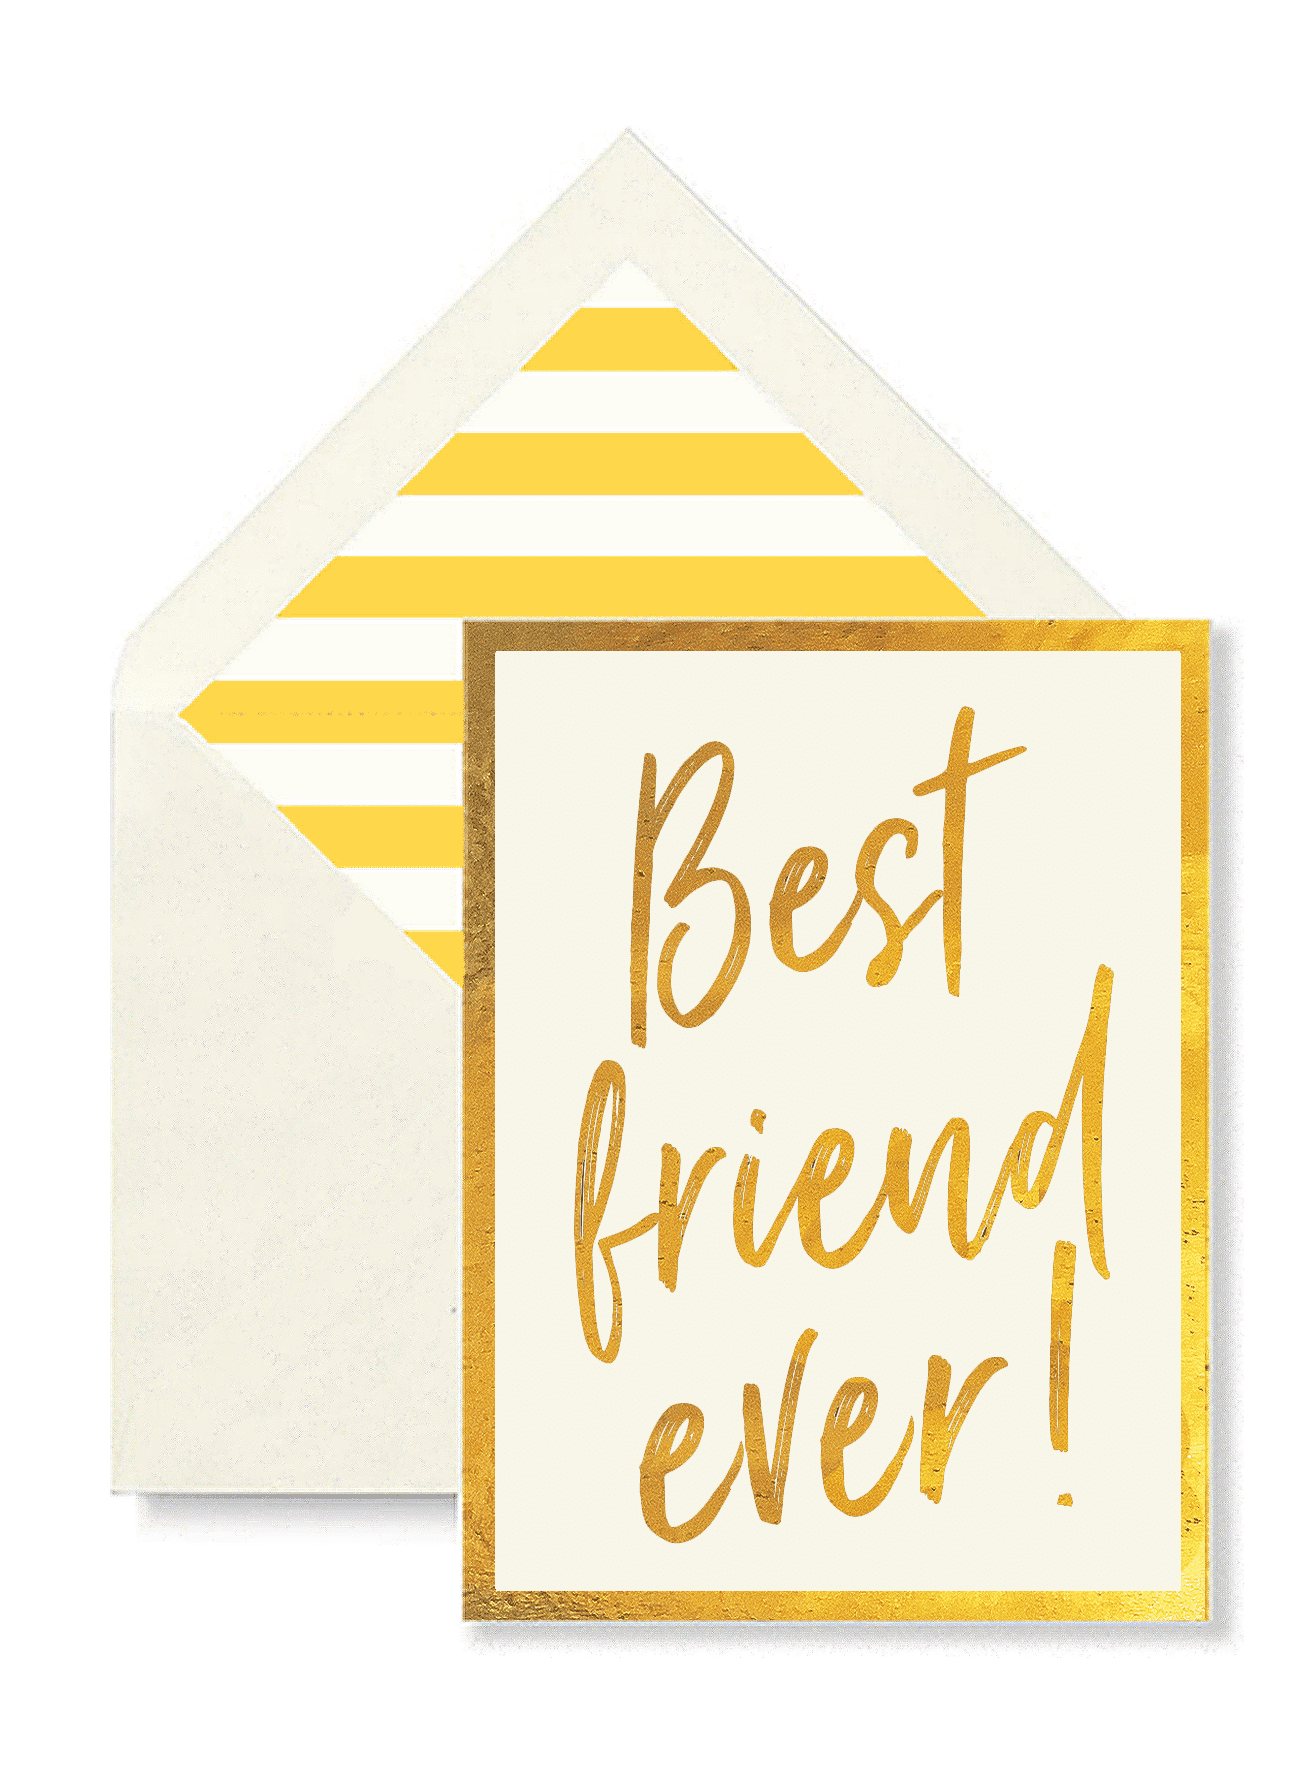 Best Friend Ever Greeting Card, Single Folded Card or Boxed Set of 8 - Bensgarden.com